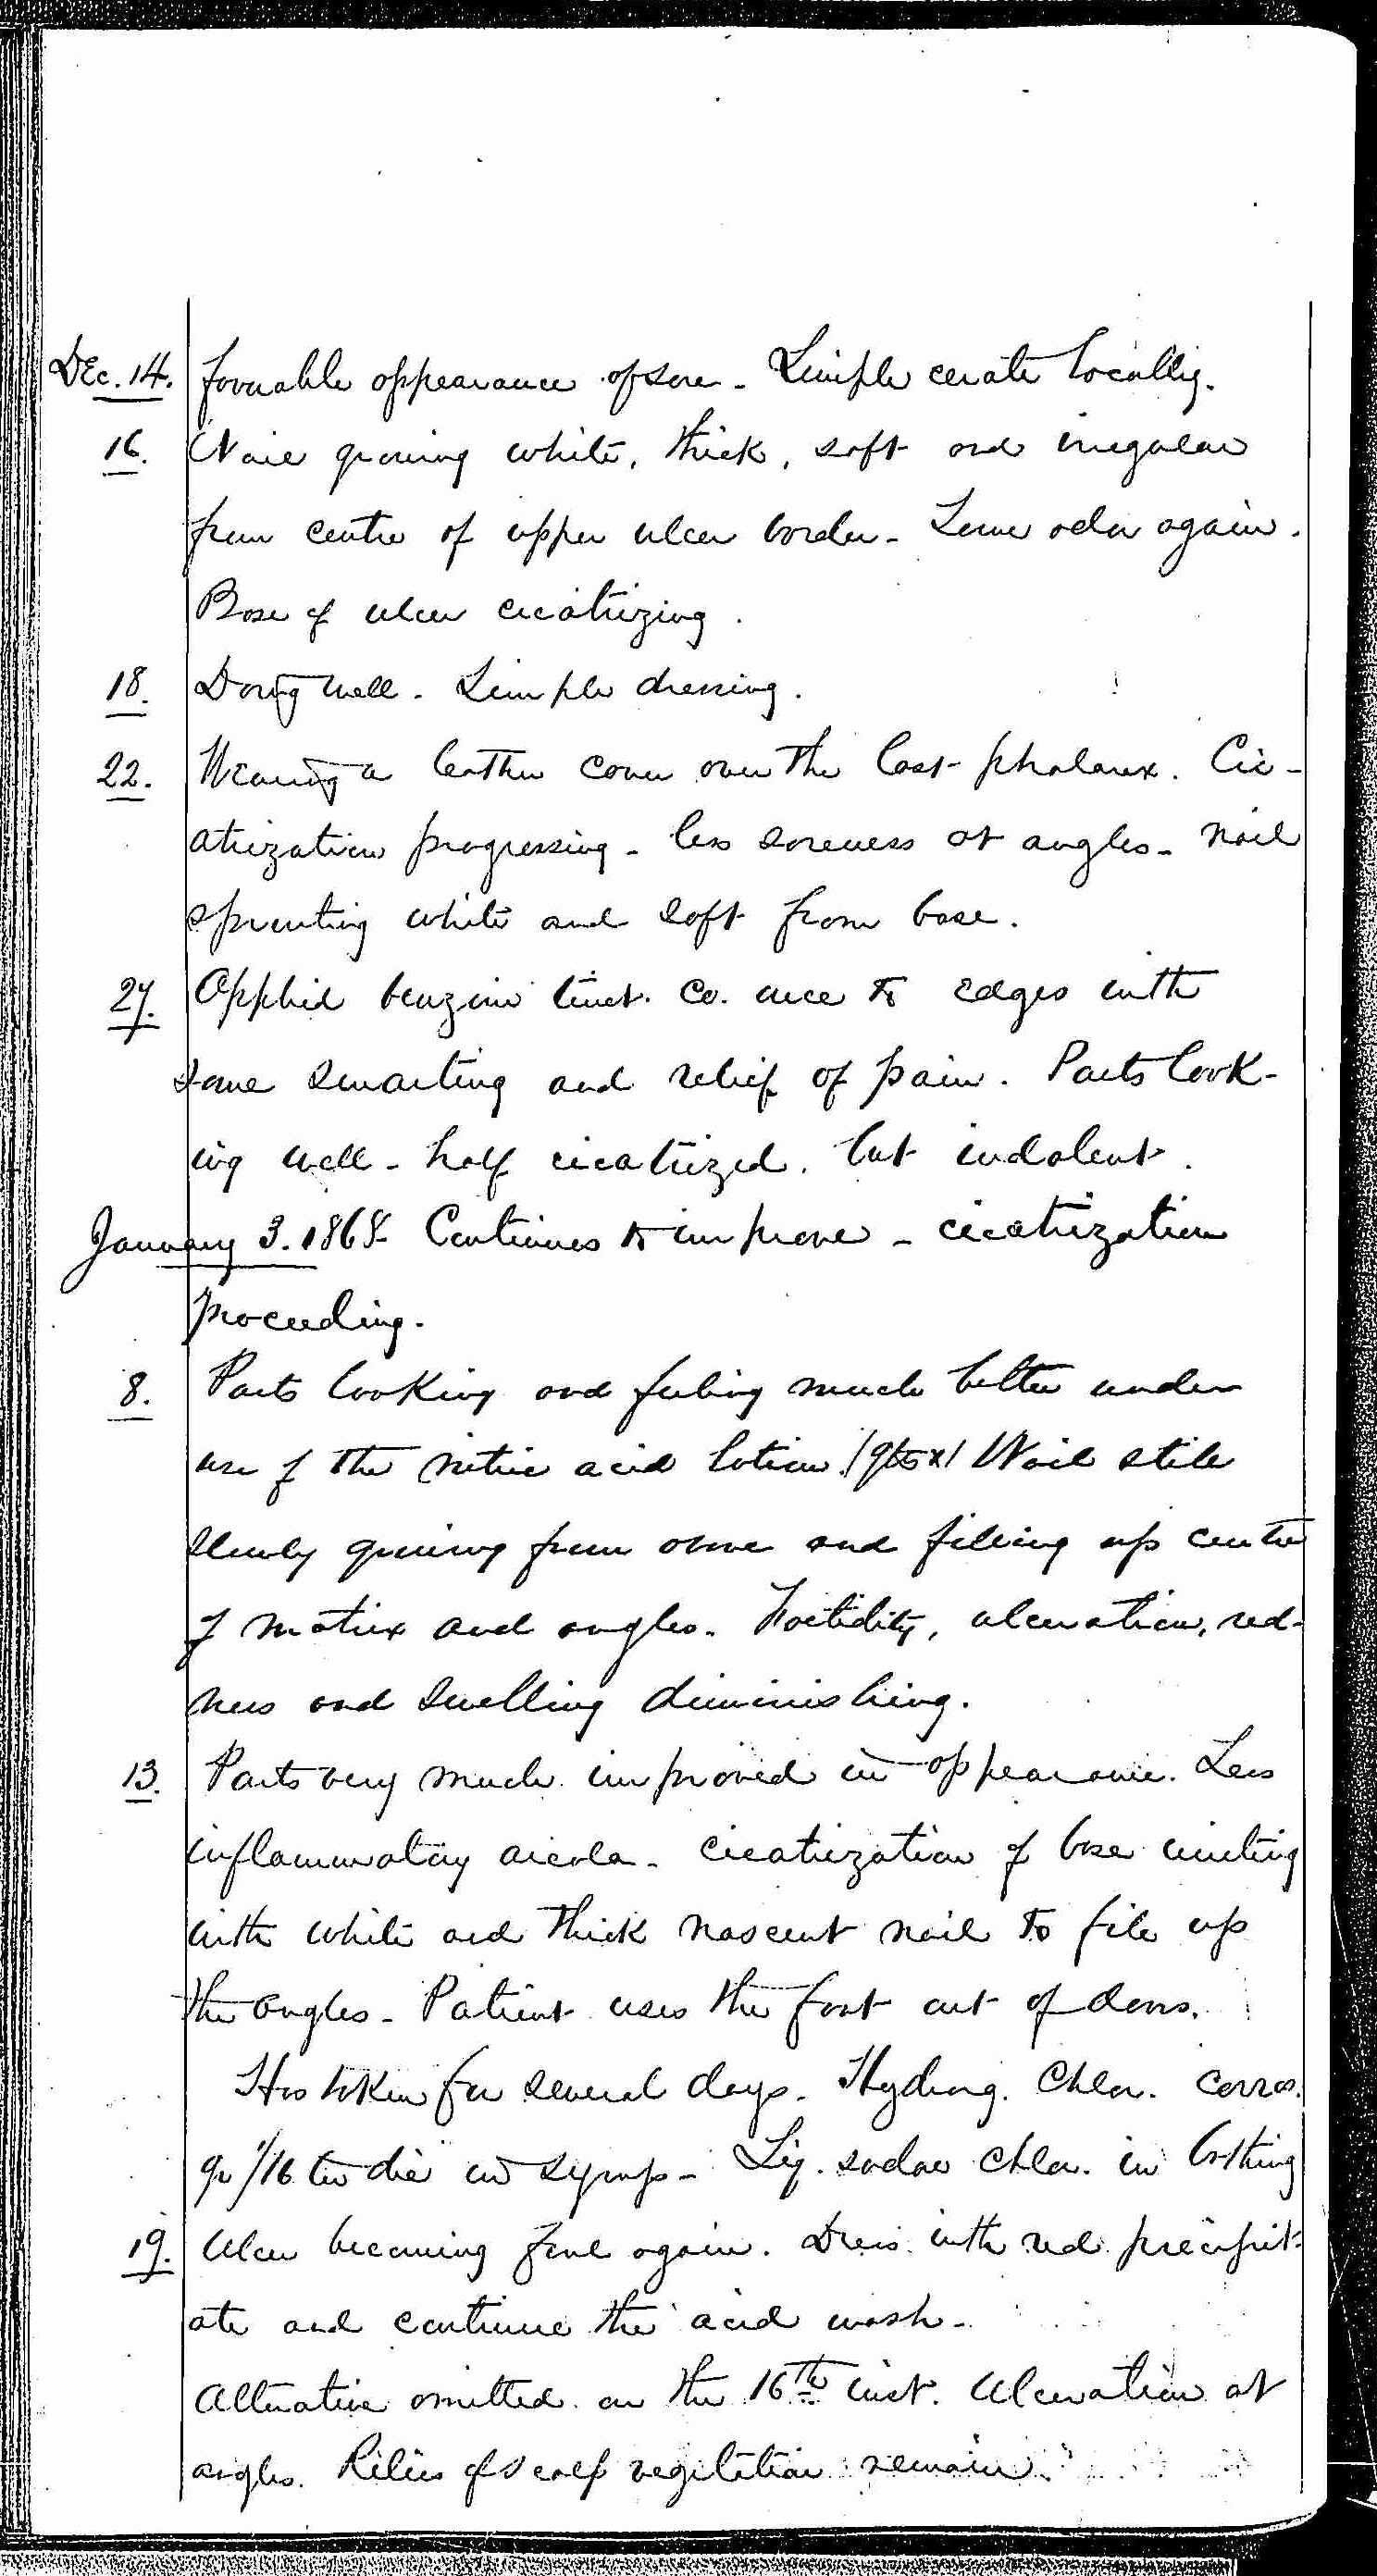 Entry for Robert S. Anderson (page 8 of 15) in the log Hospital Tickets and Case Papers - Naval Hospital - Washington, D.C. - 1868-69